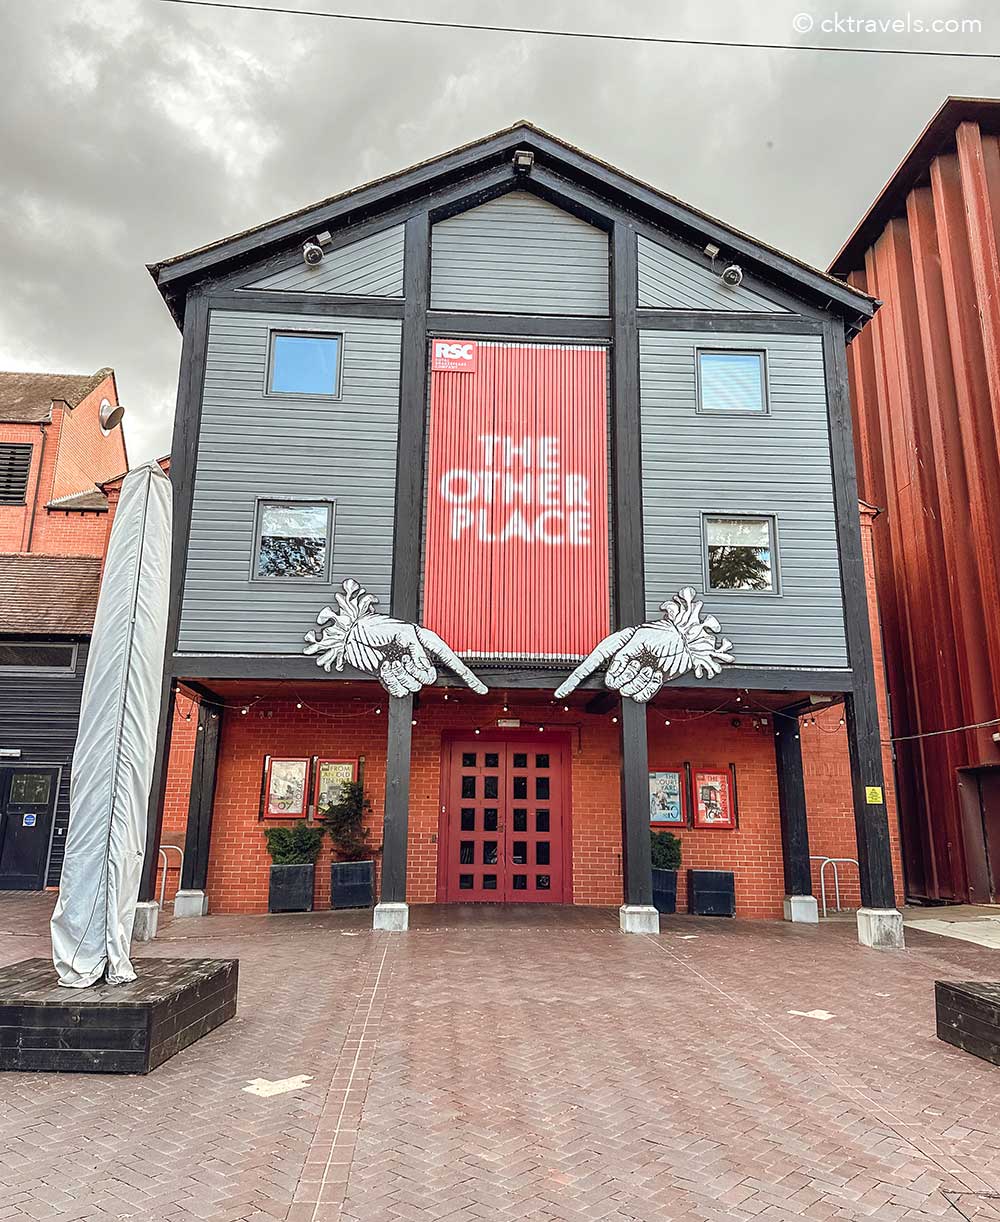 Royal Shakespeare Company The Other Place Theatre